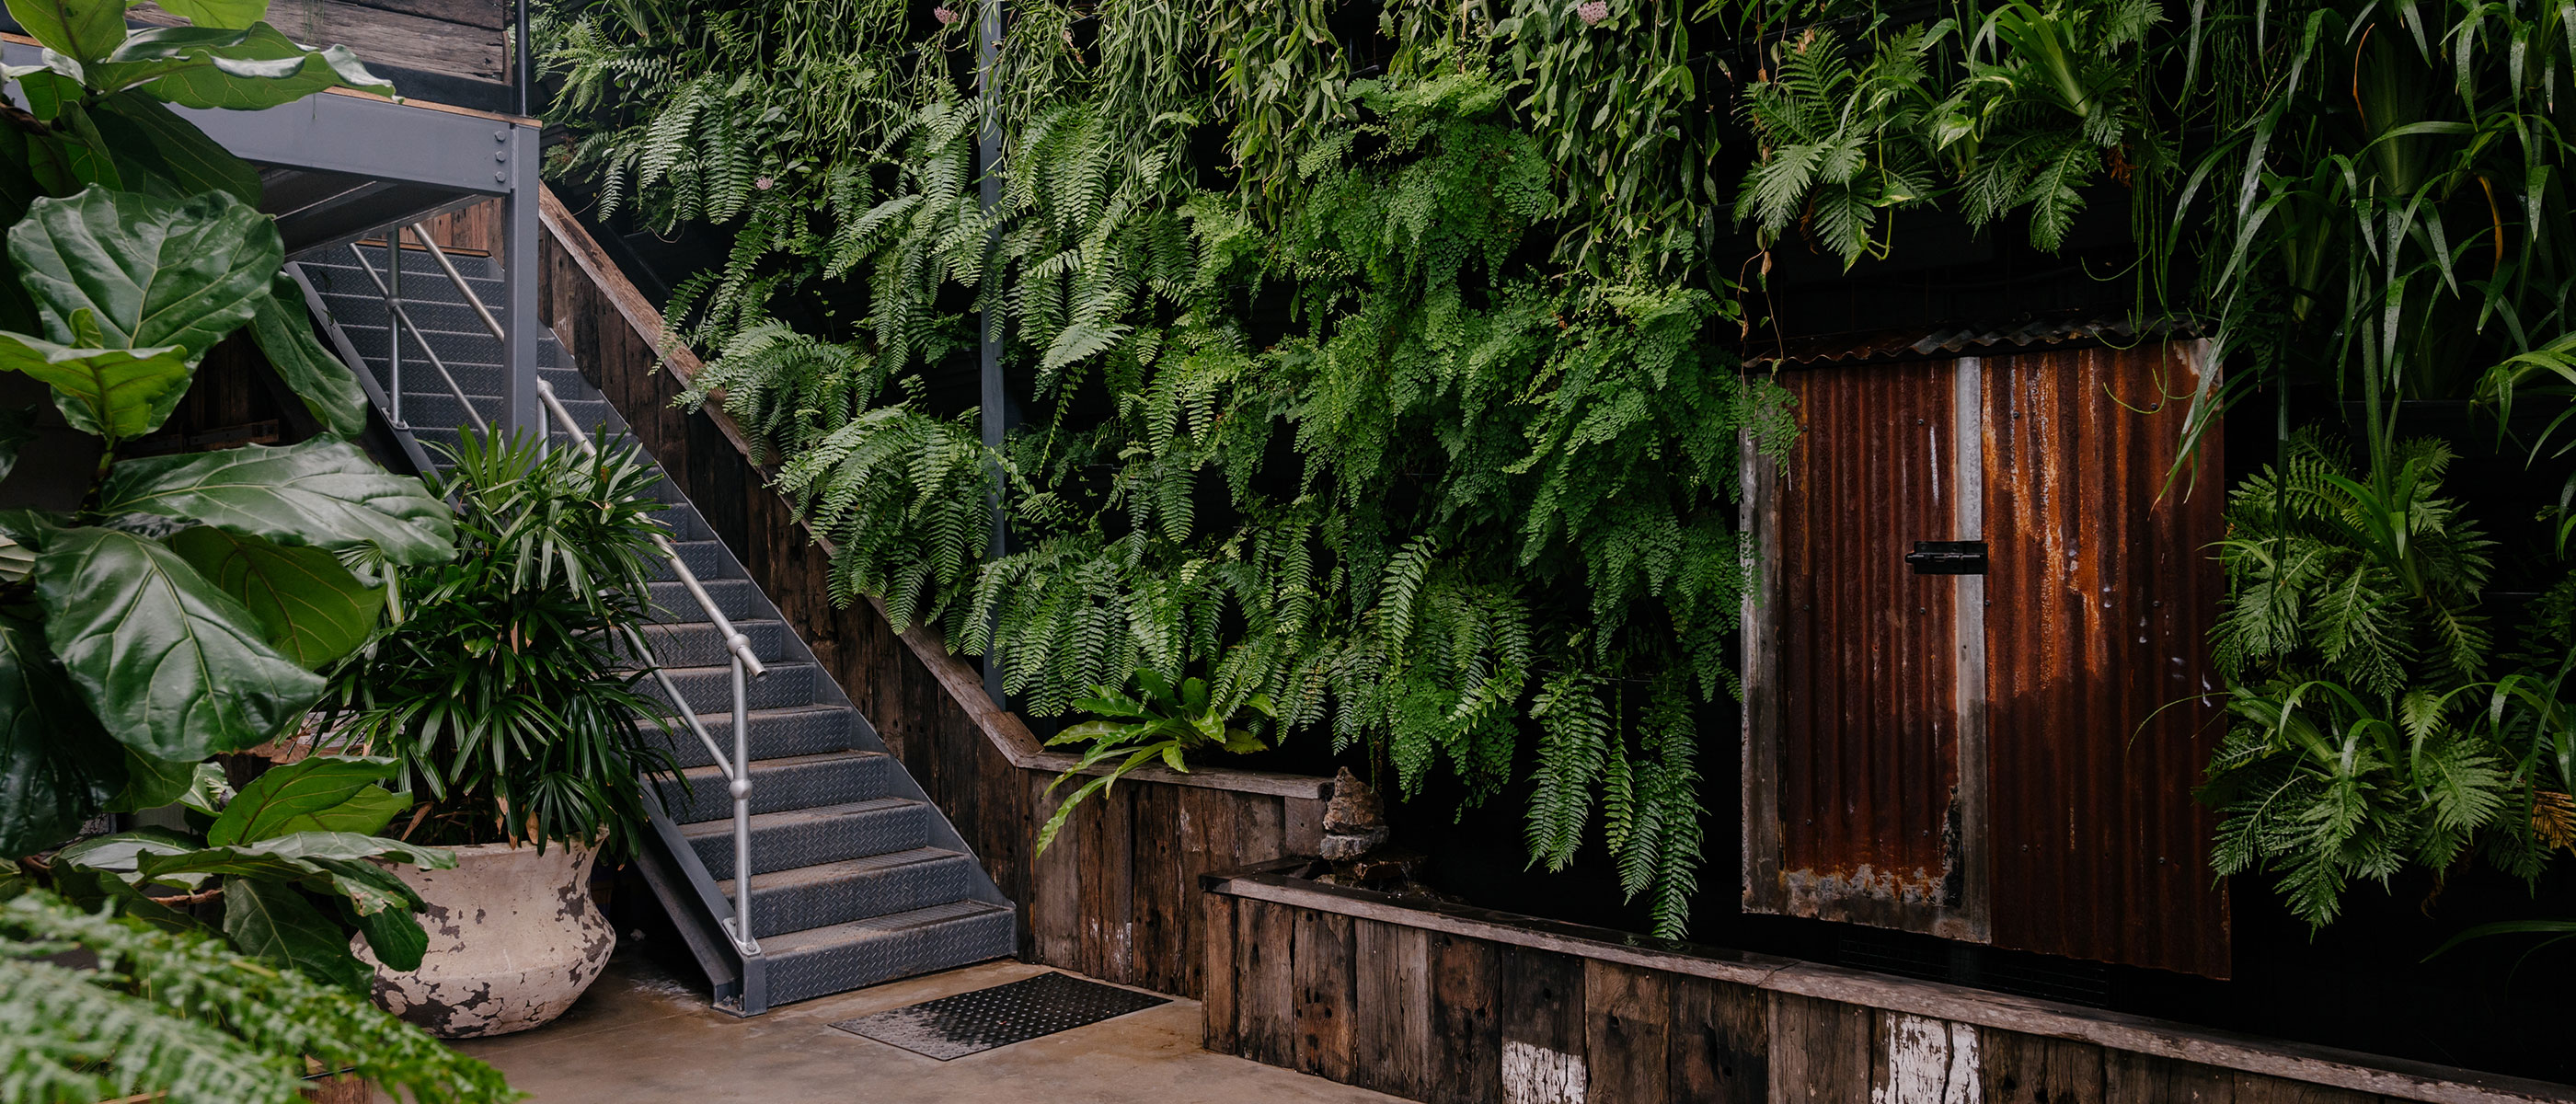 Vertical garden with steps leading to mezzanine floor and rustic recycled corrugated iron cabinet cover